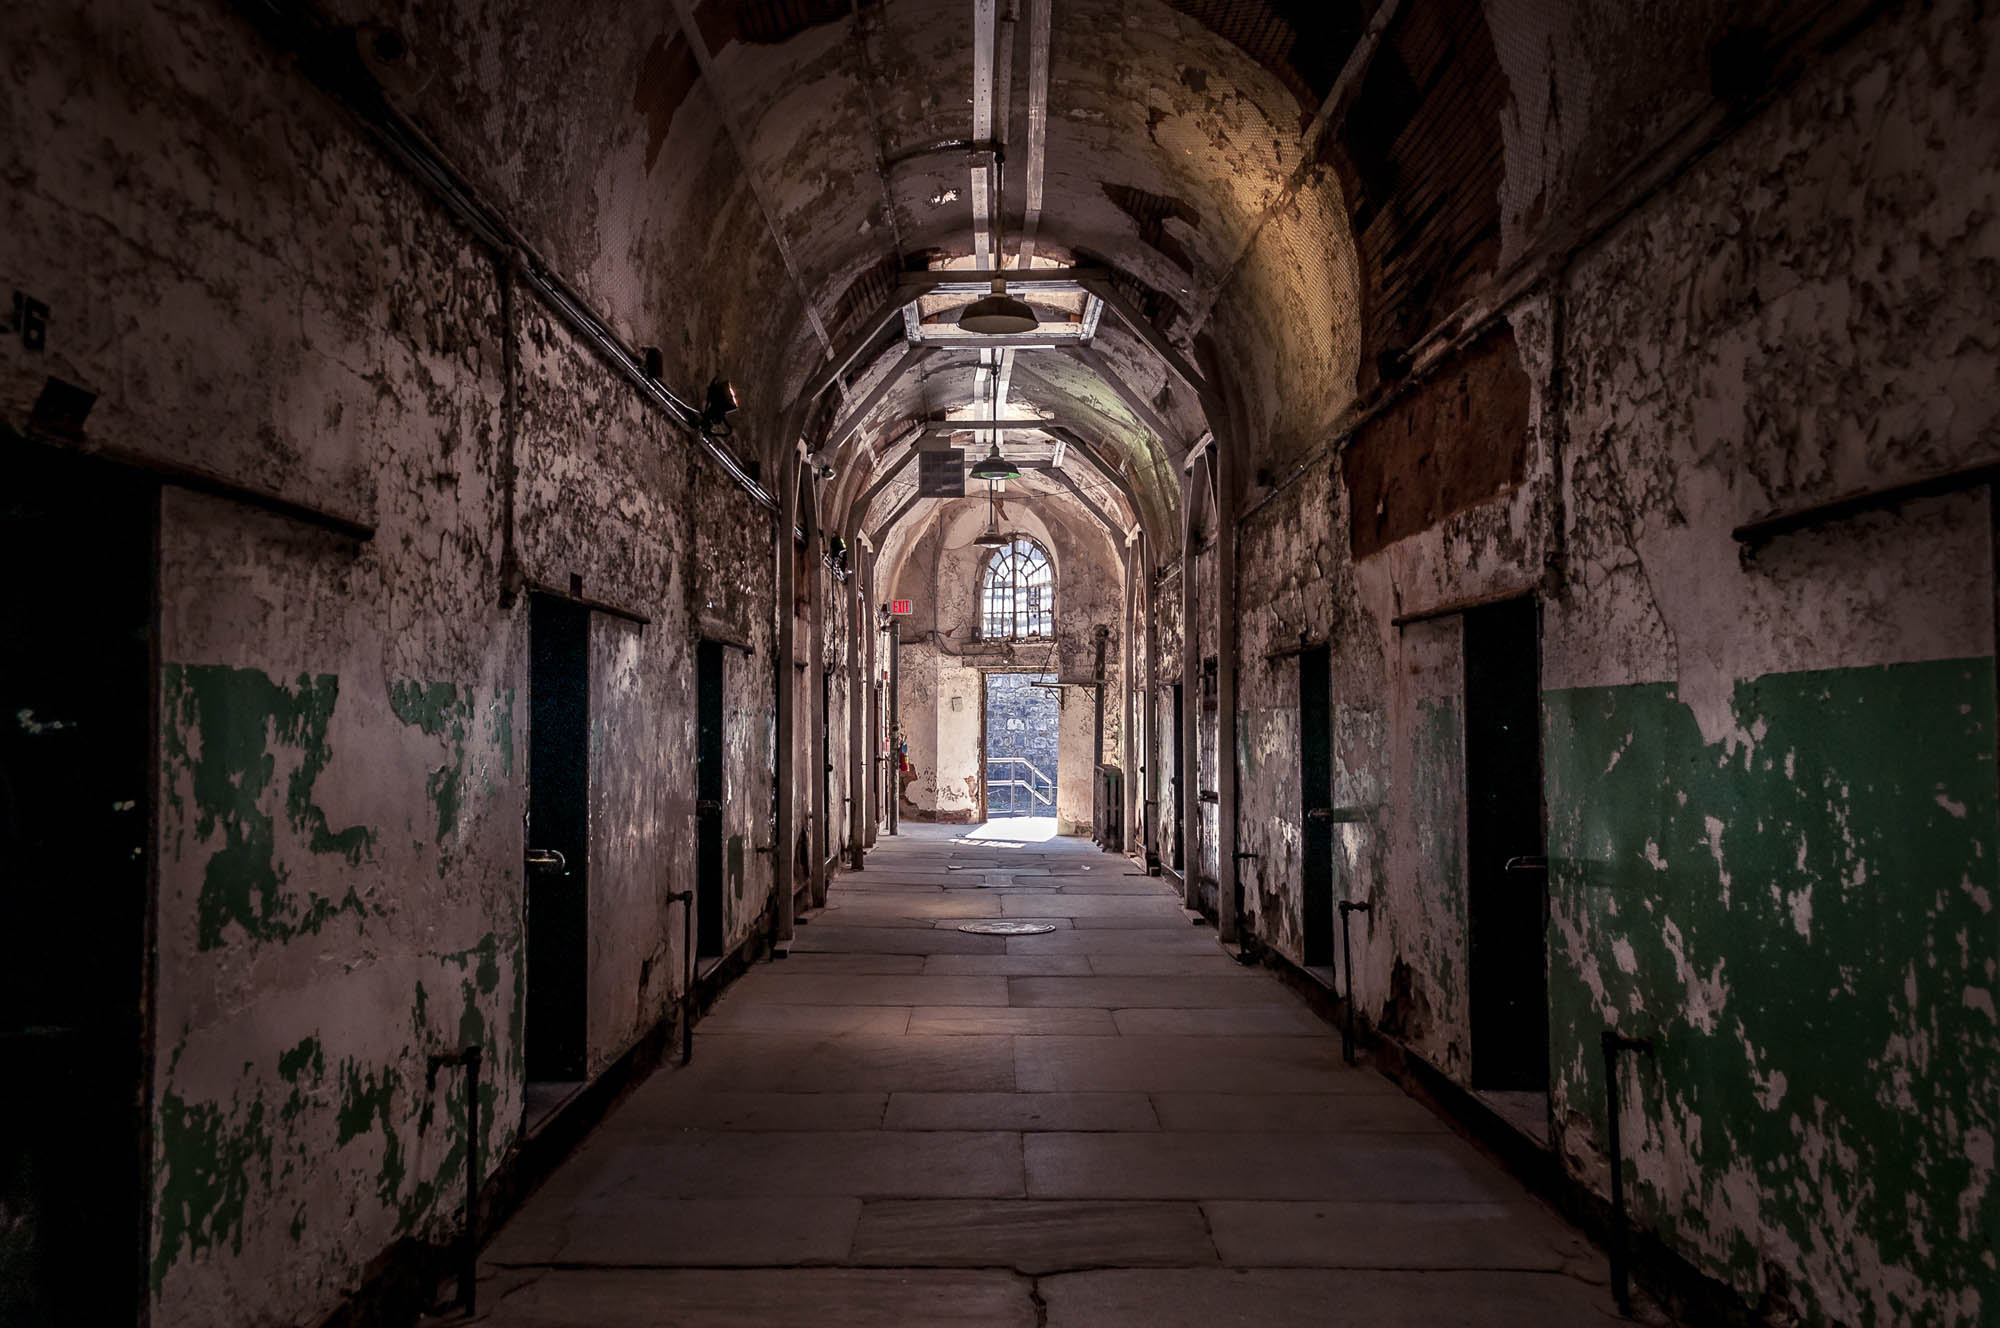 eastern state penitentiary - most haunted places in america